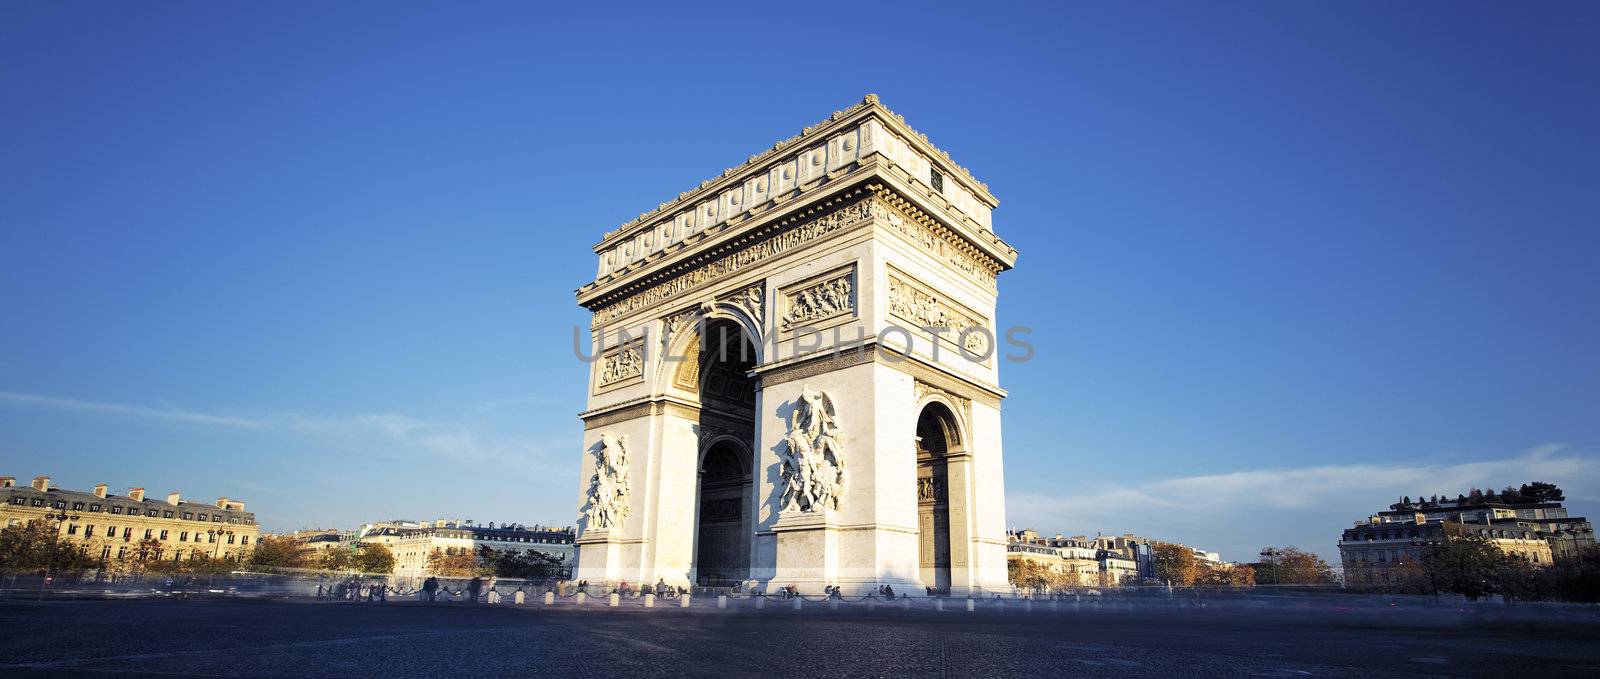 panoramic view of the Arc de Triomphe by vwalakte